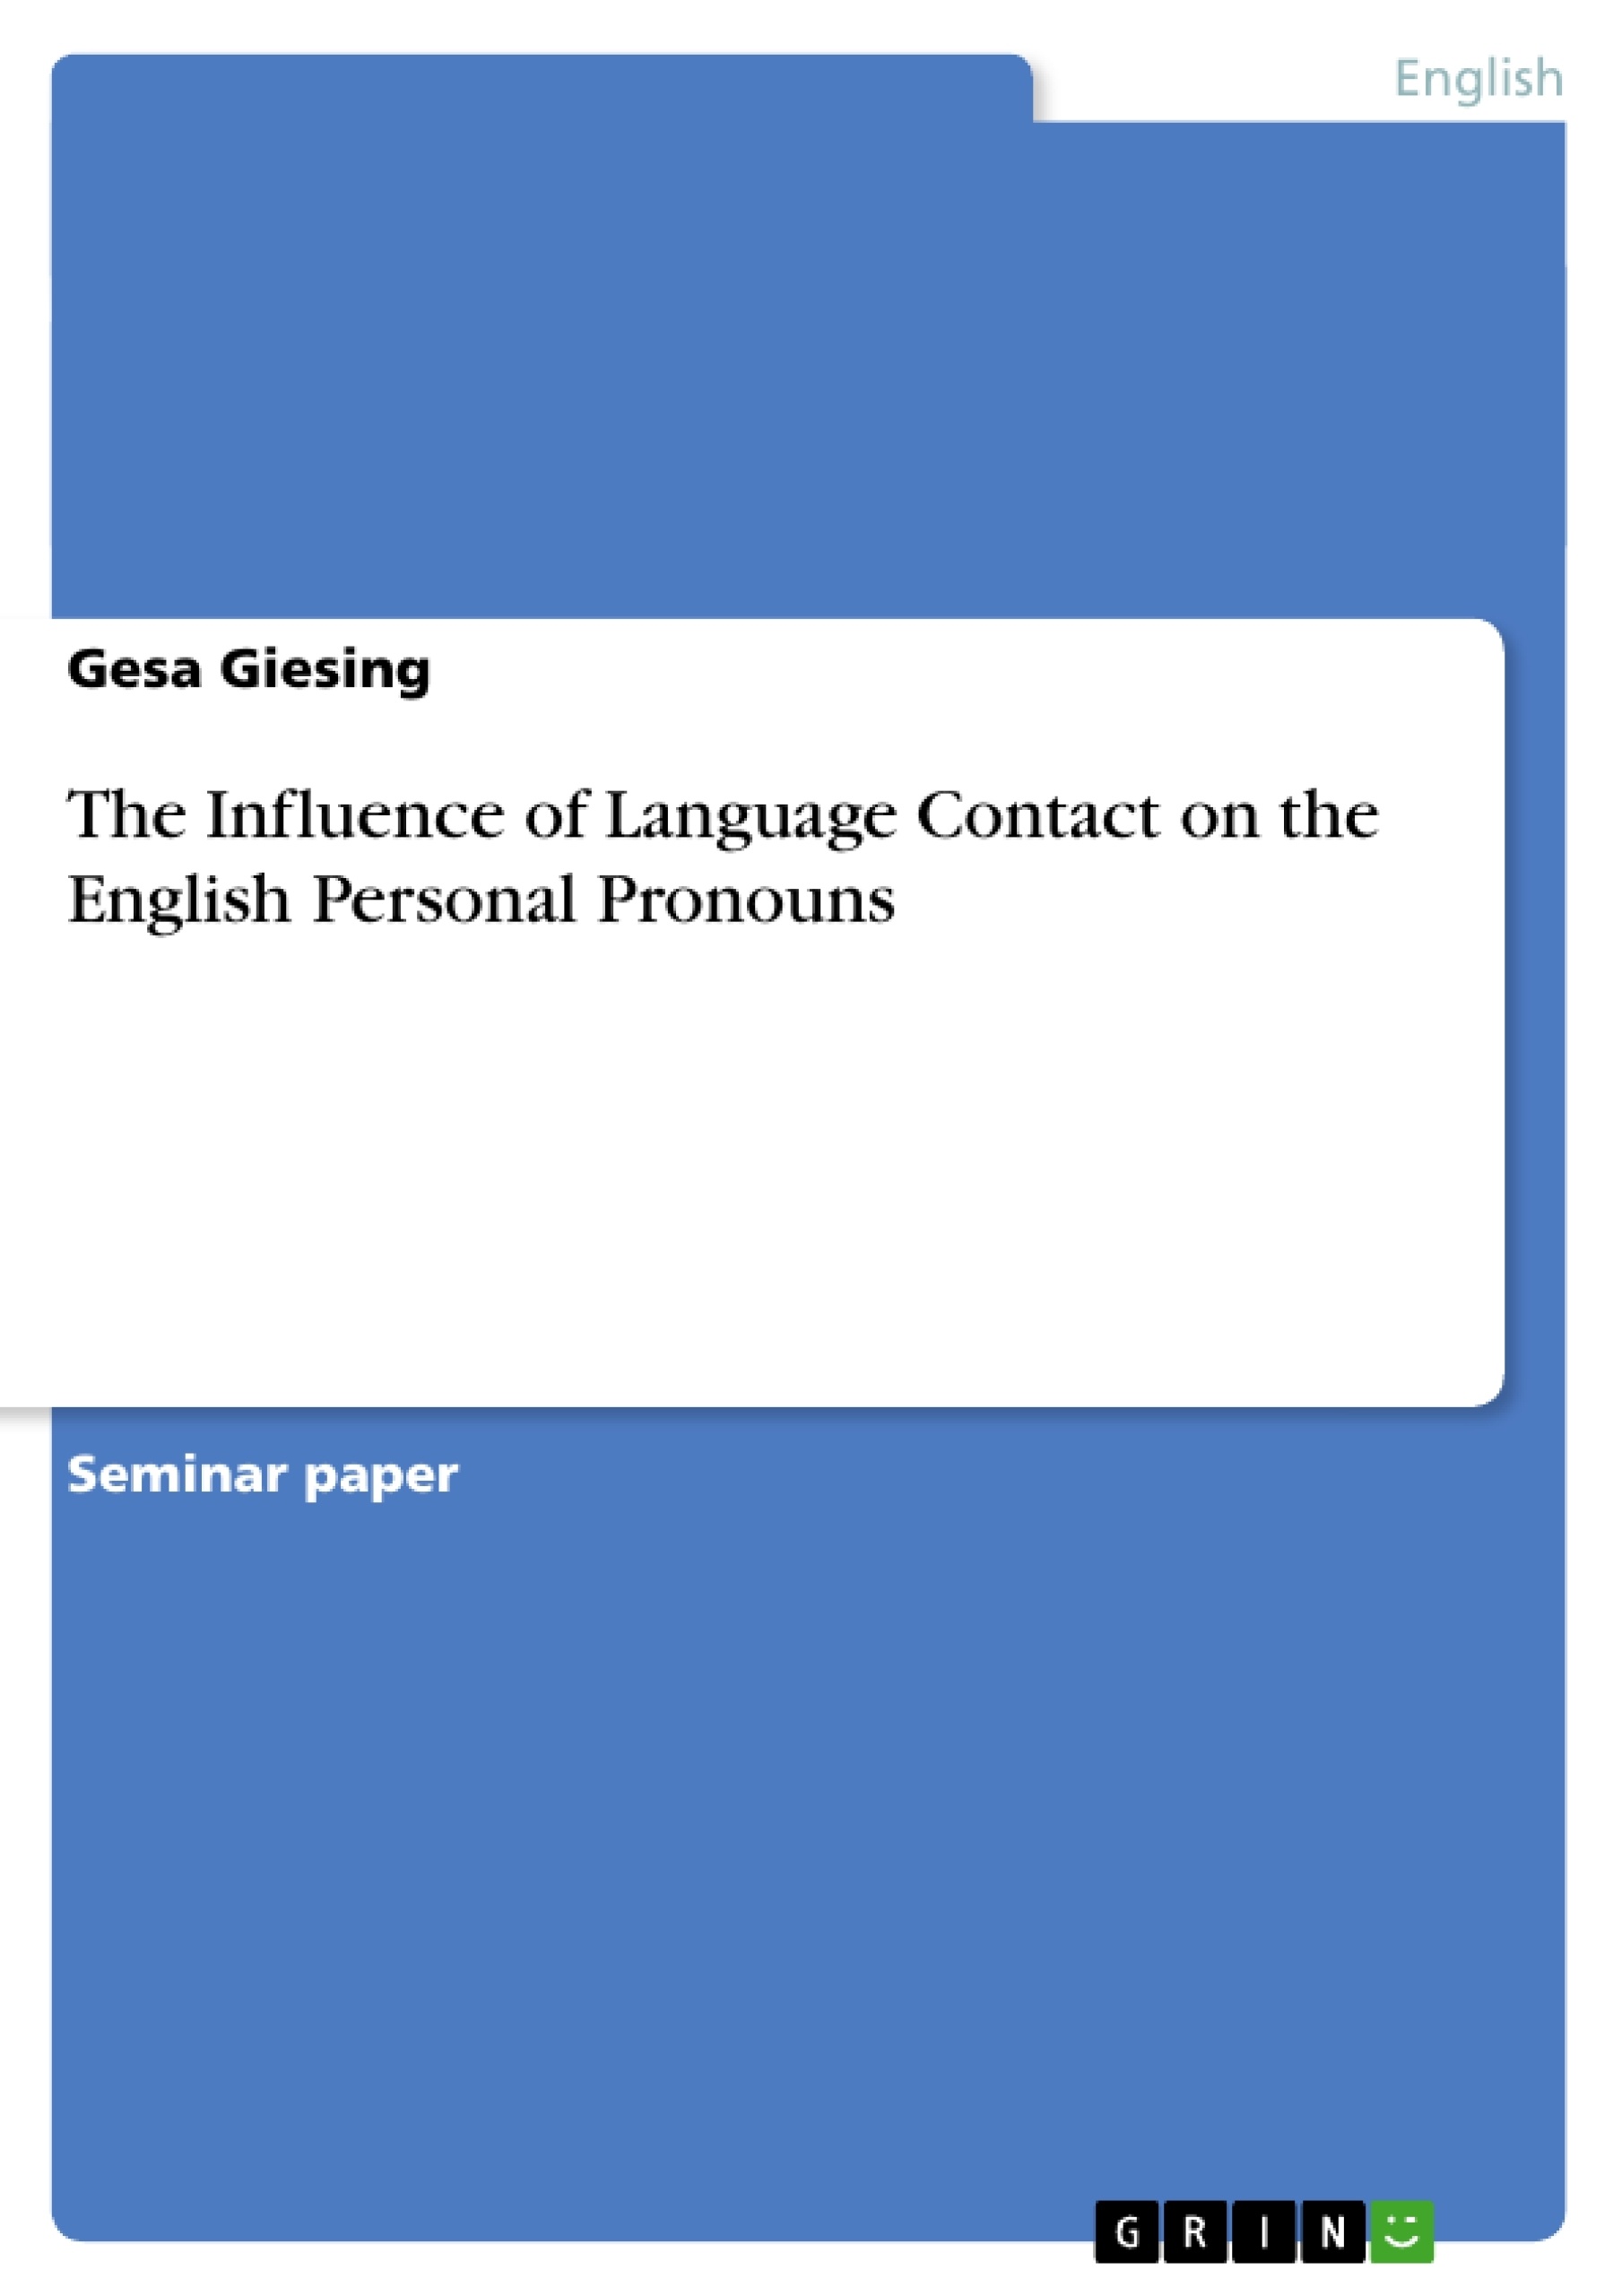 Title: The Influence of Language Contact on the English Personal Pronouns